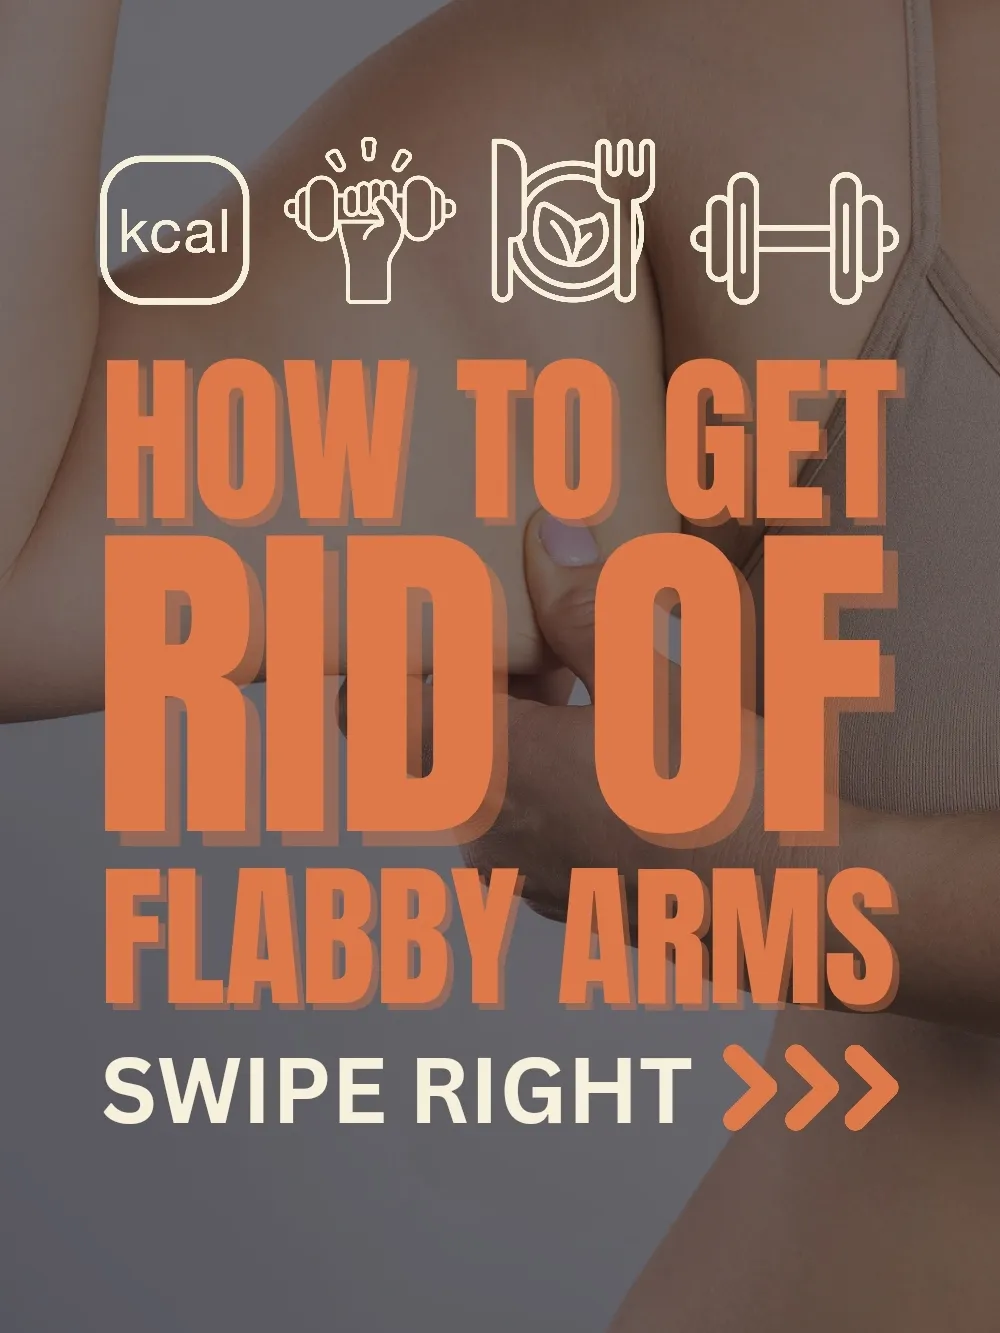 arm workouts for flabby arms｜TikTok Search